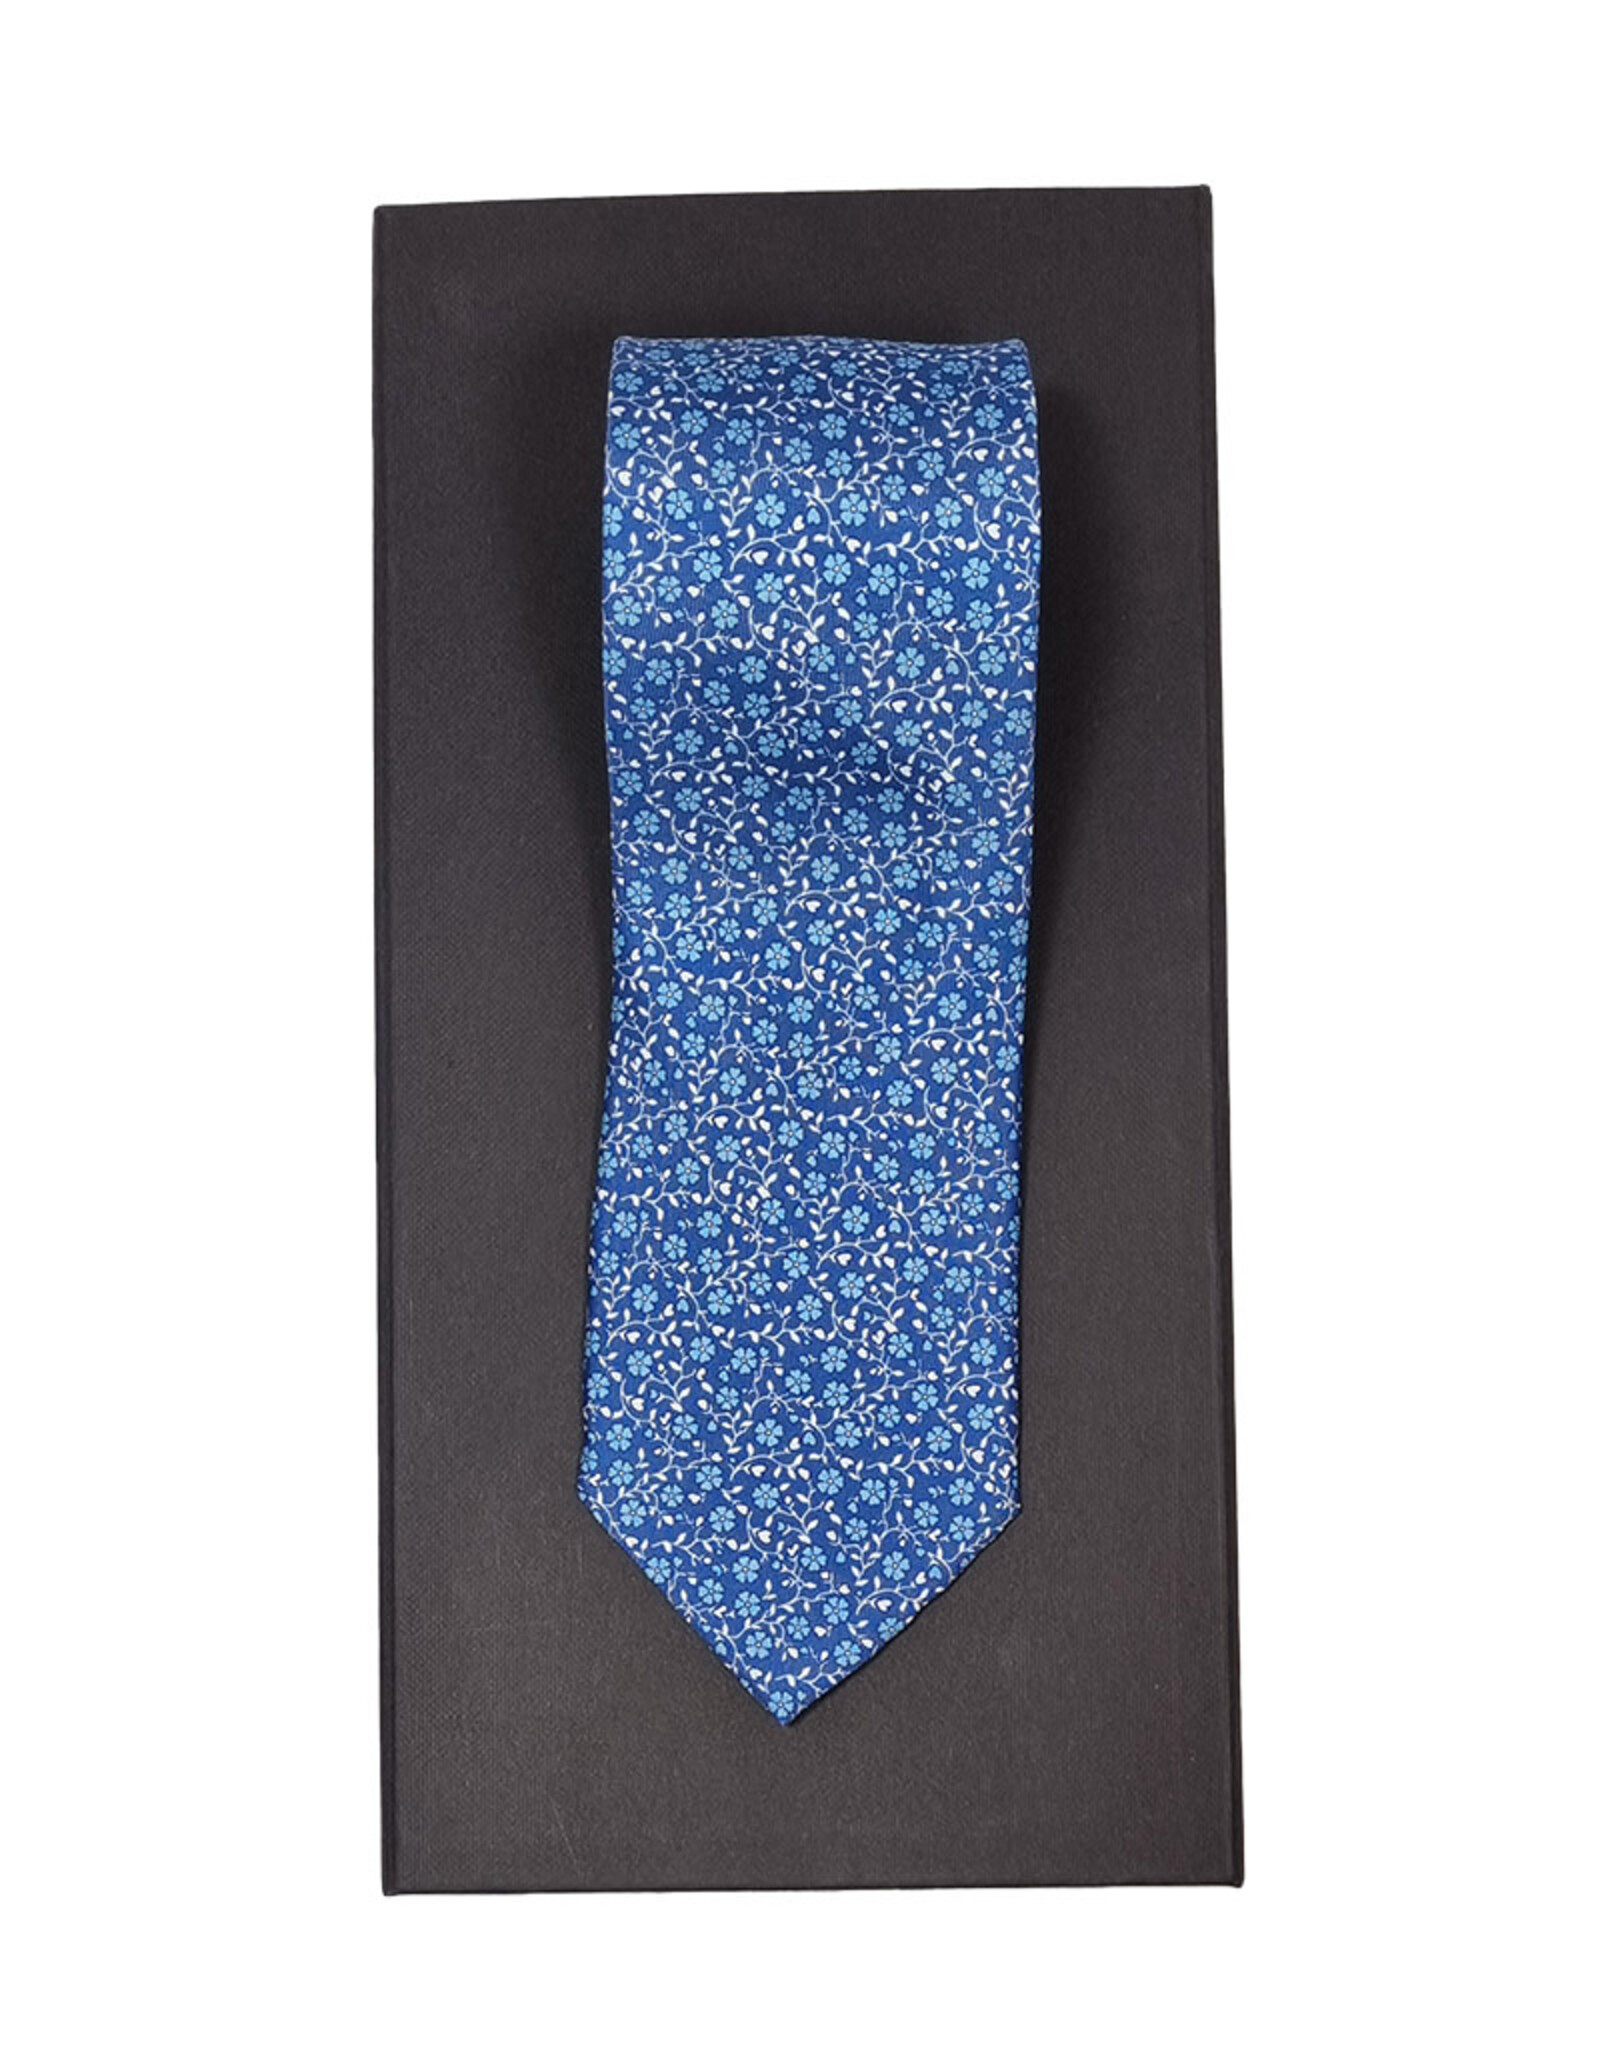 Calabrese Calabrese tie blue flowers 7942012/002